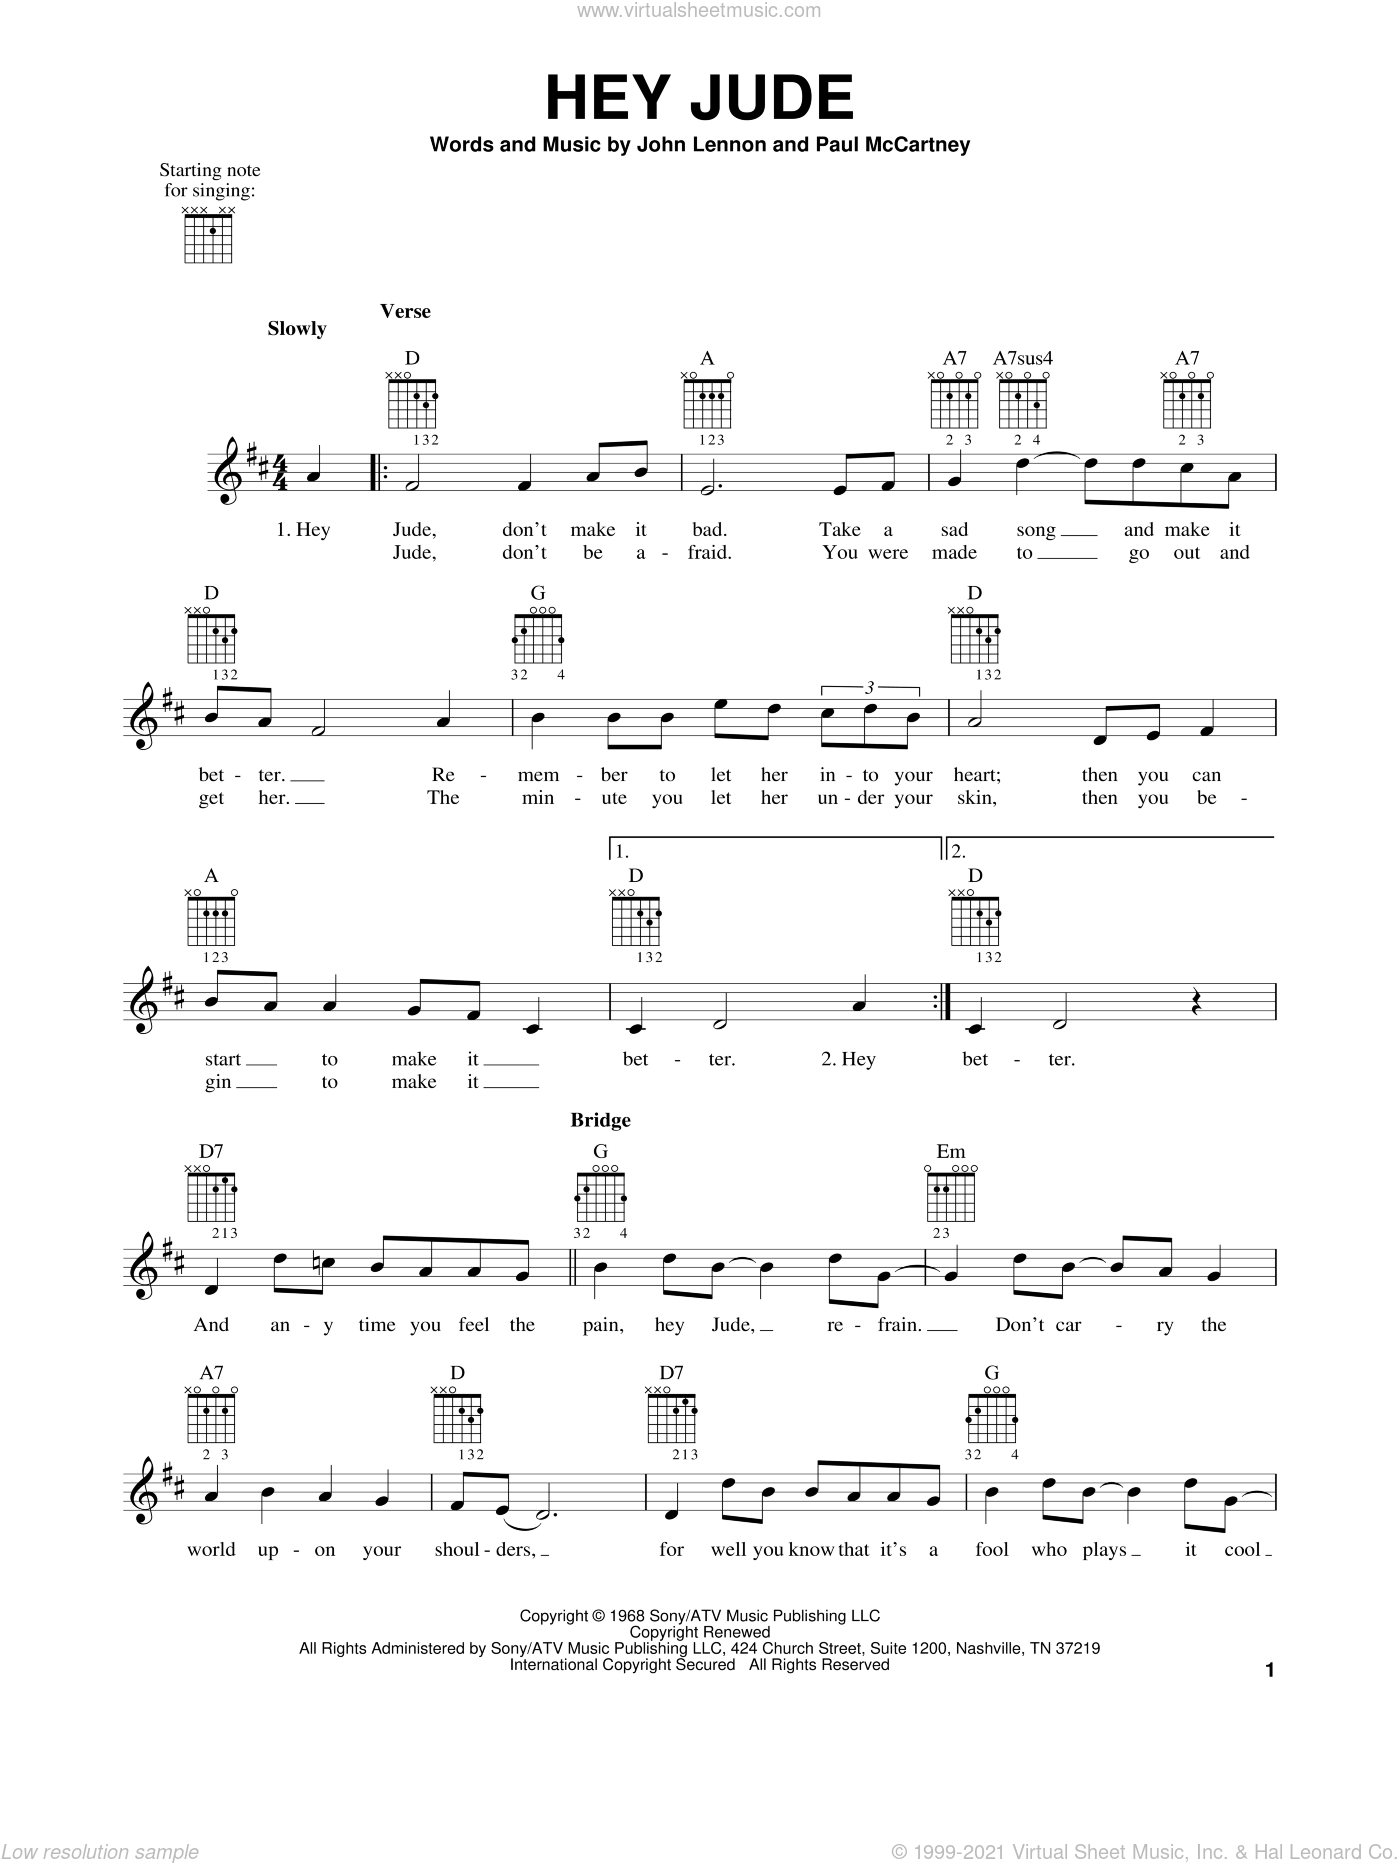 Beatles - Hey Jude sheet music (easy) for guitar solo (chords)